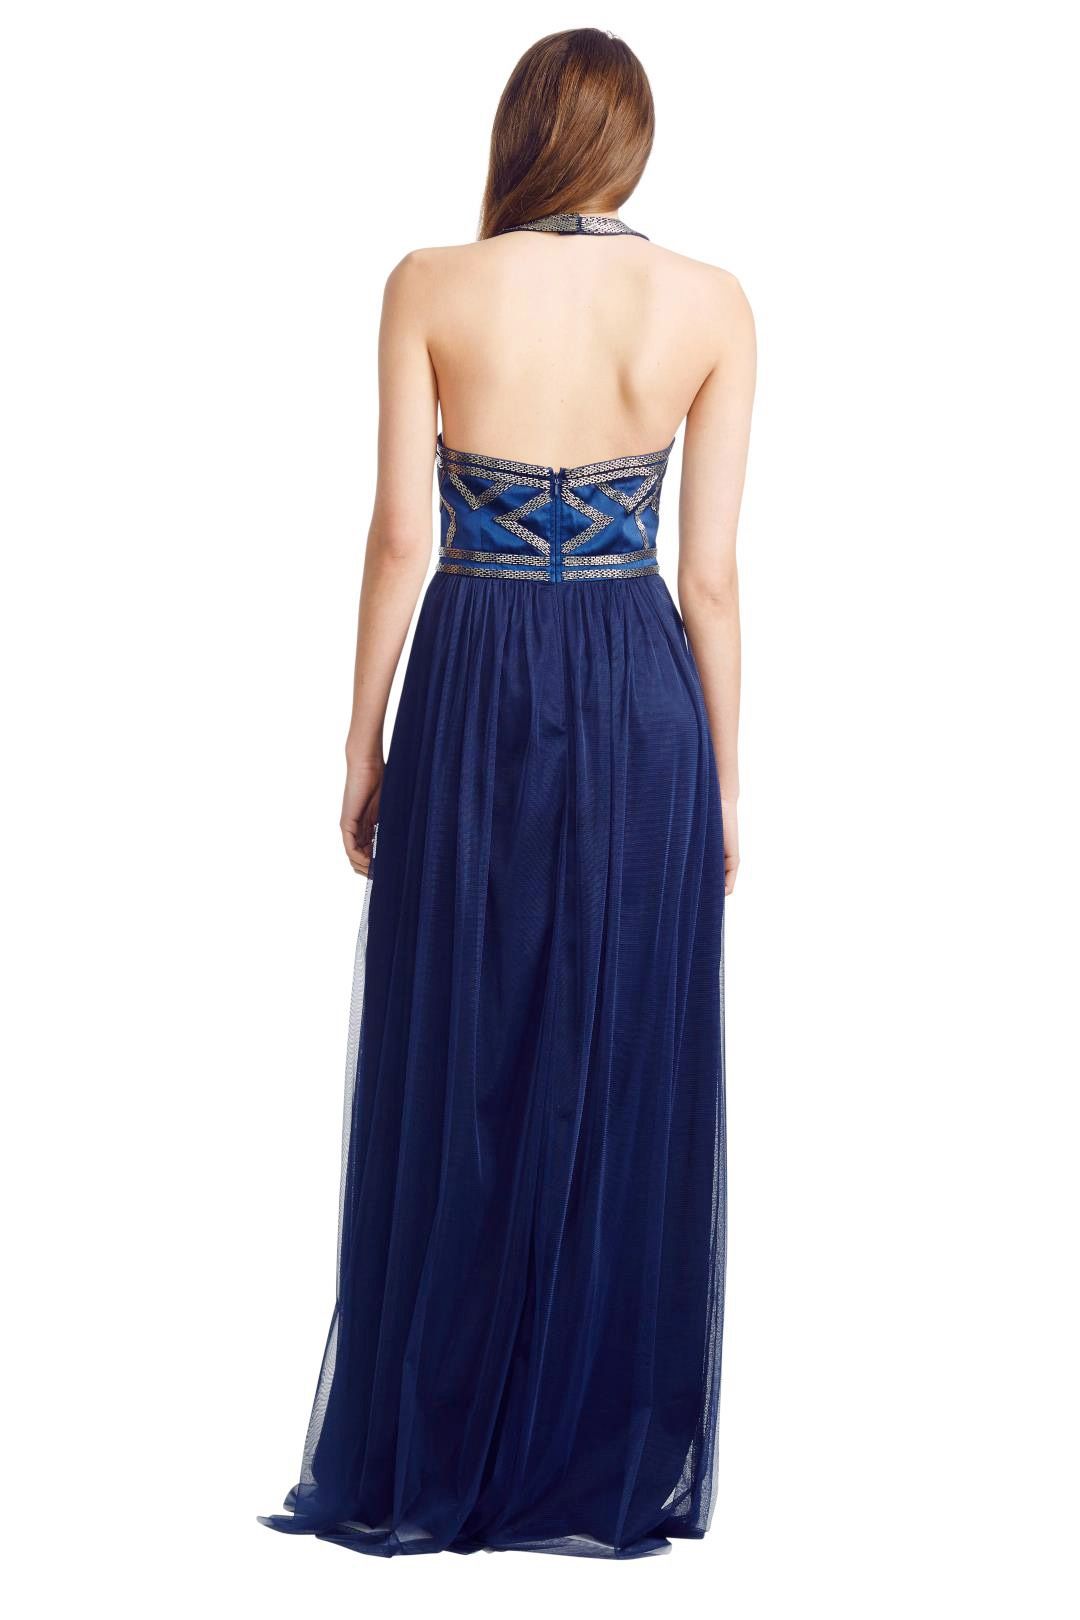 George - Kylie Gown - Blue - Back